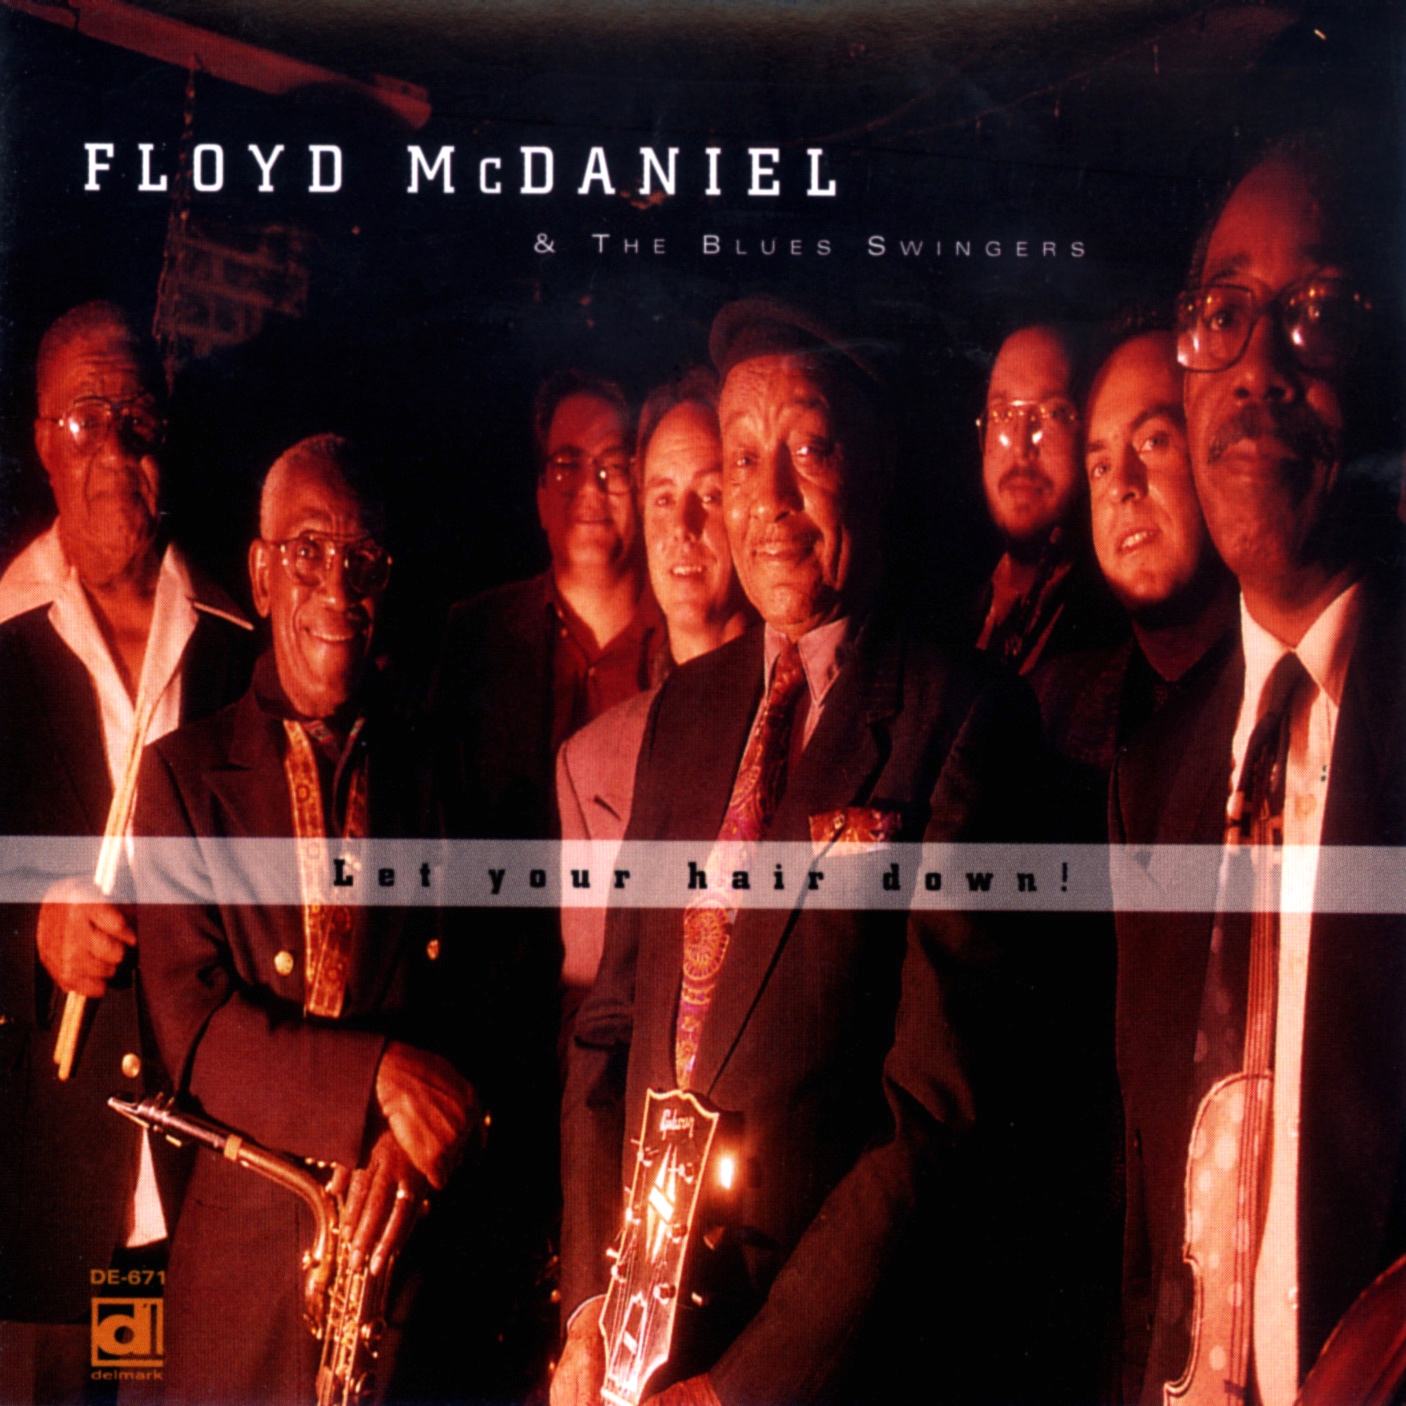 Floyd McDaniel and The Blues Swingers – Let Your Hair Down!